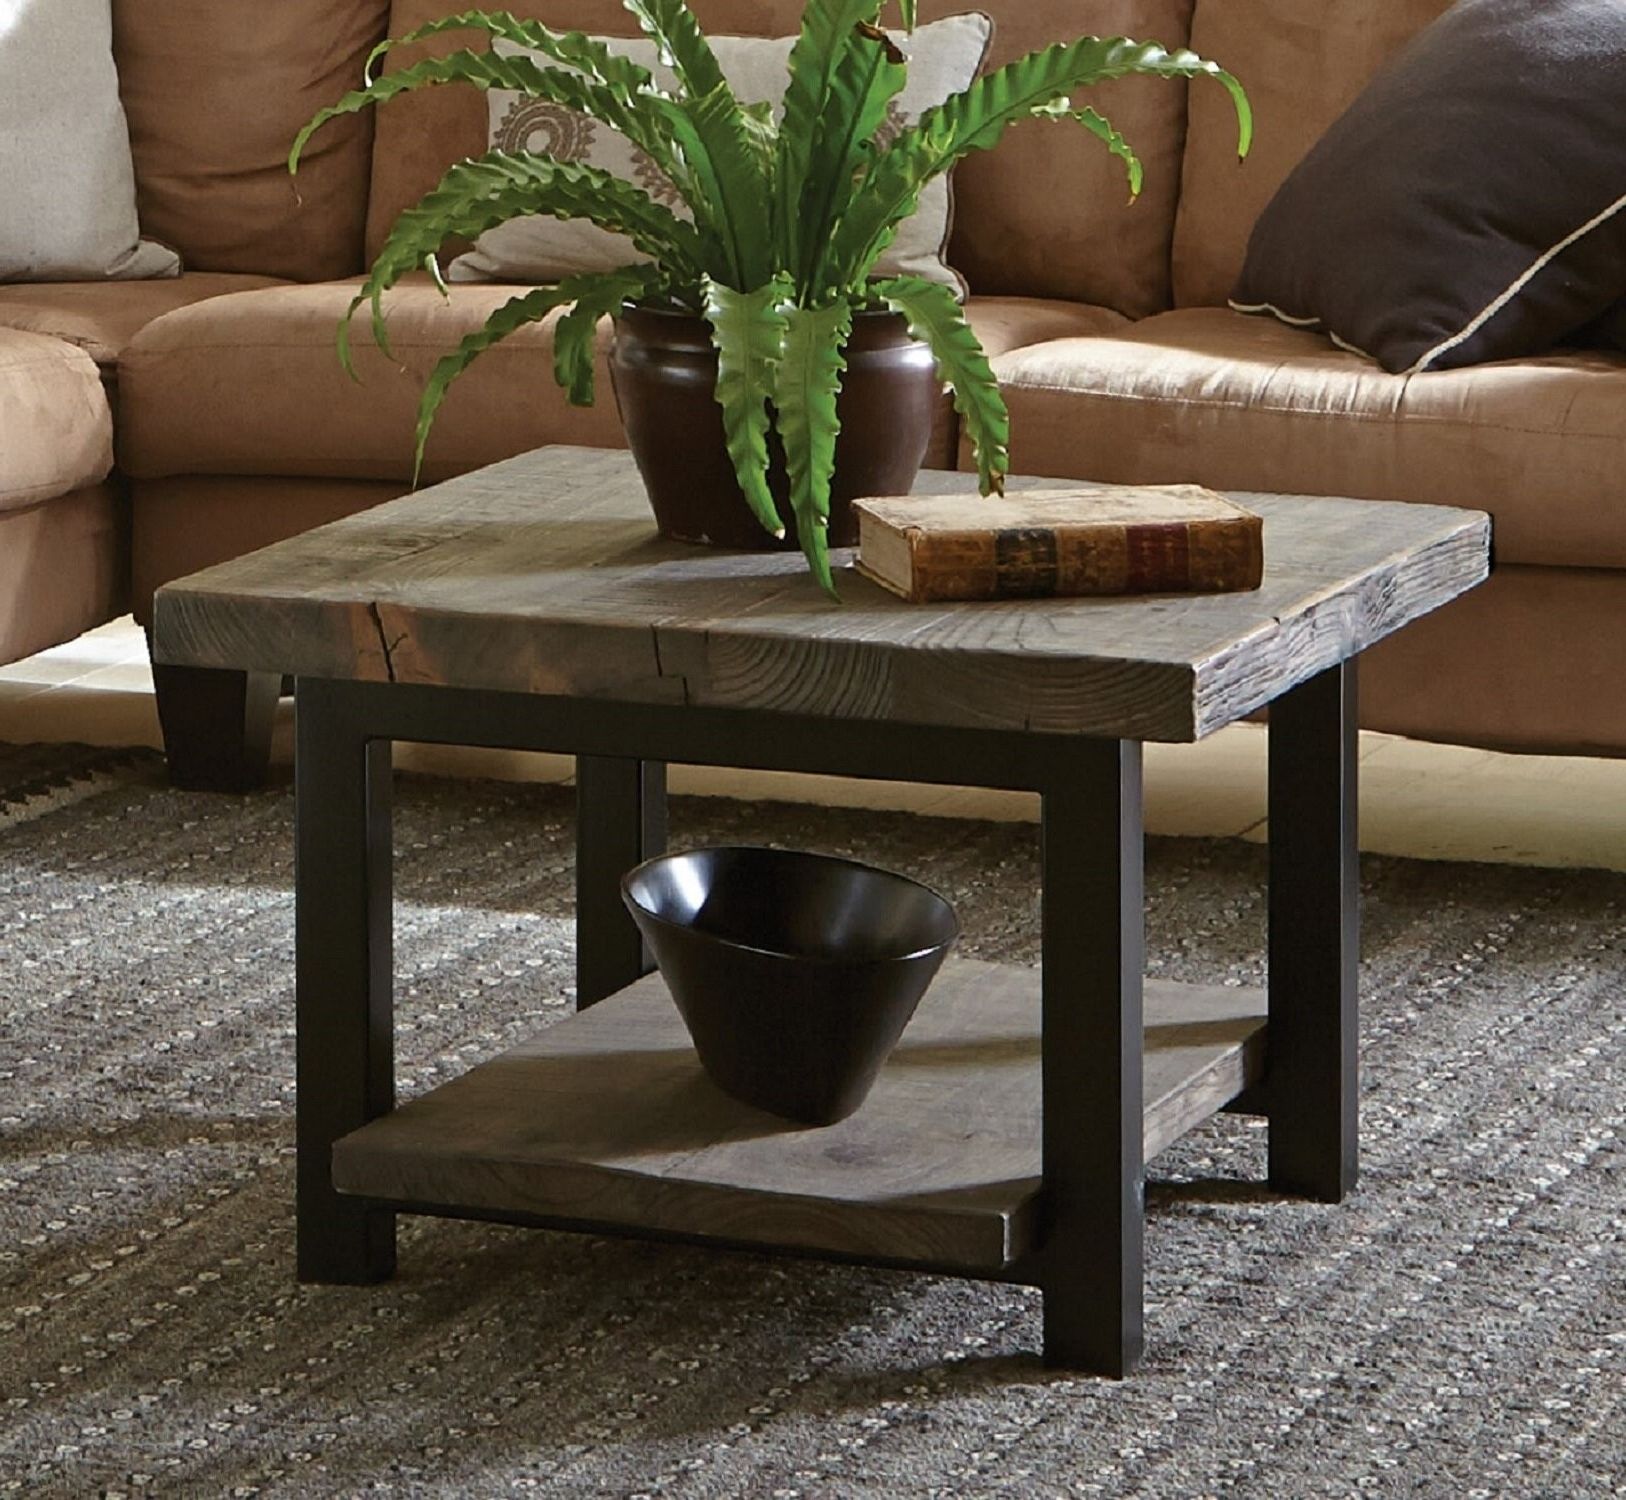 Best And Newest Iron Legs Coffee Tables For Wood Top Coffee Tables Metal Legs – Ideas On Foter (View 3 of 20)